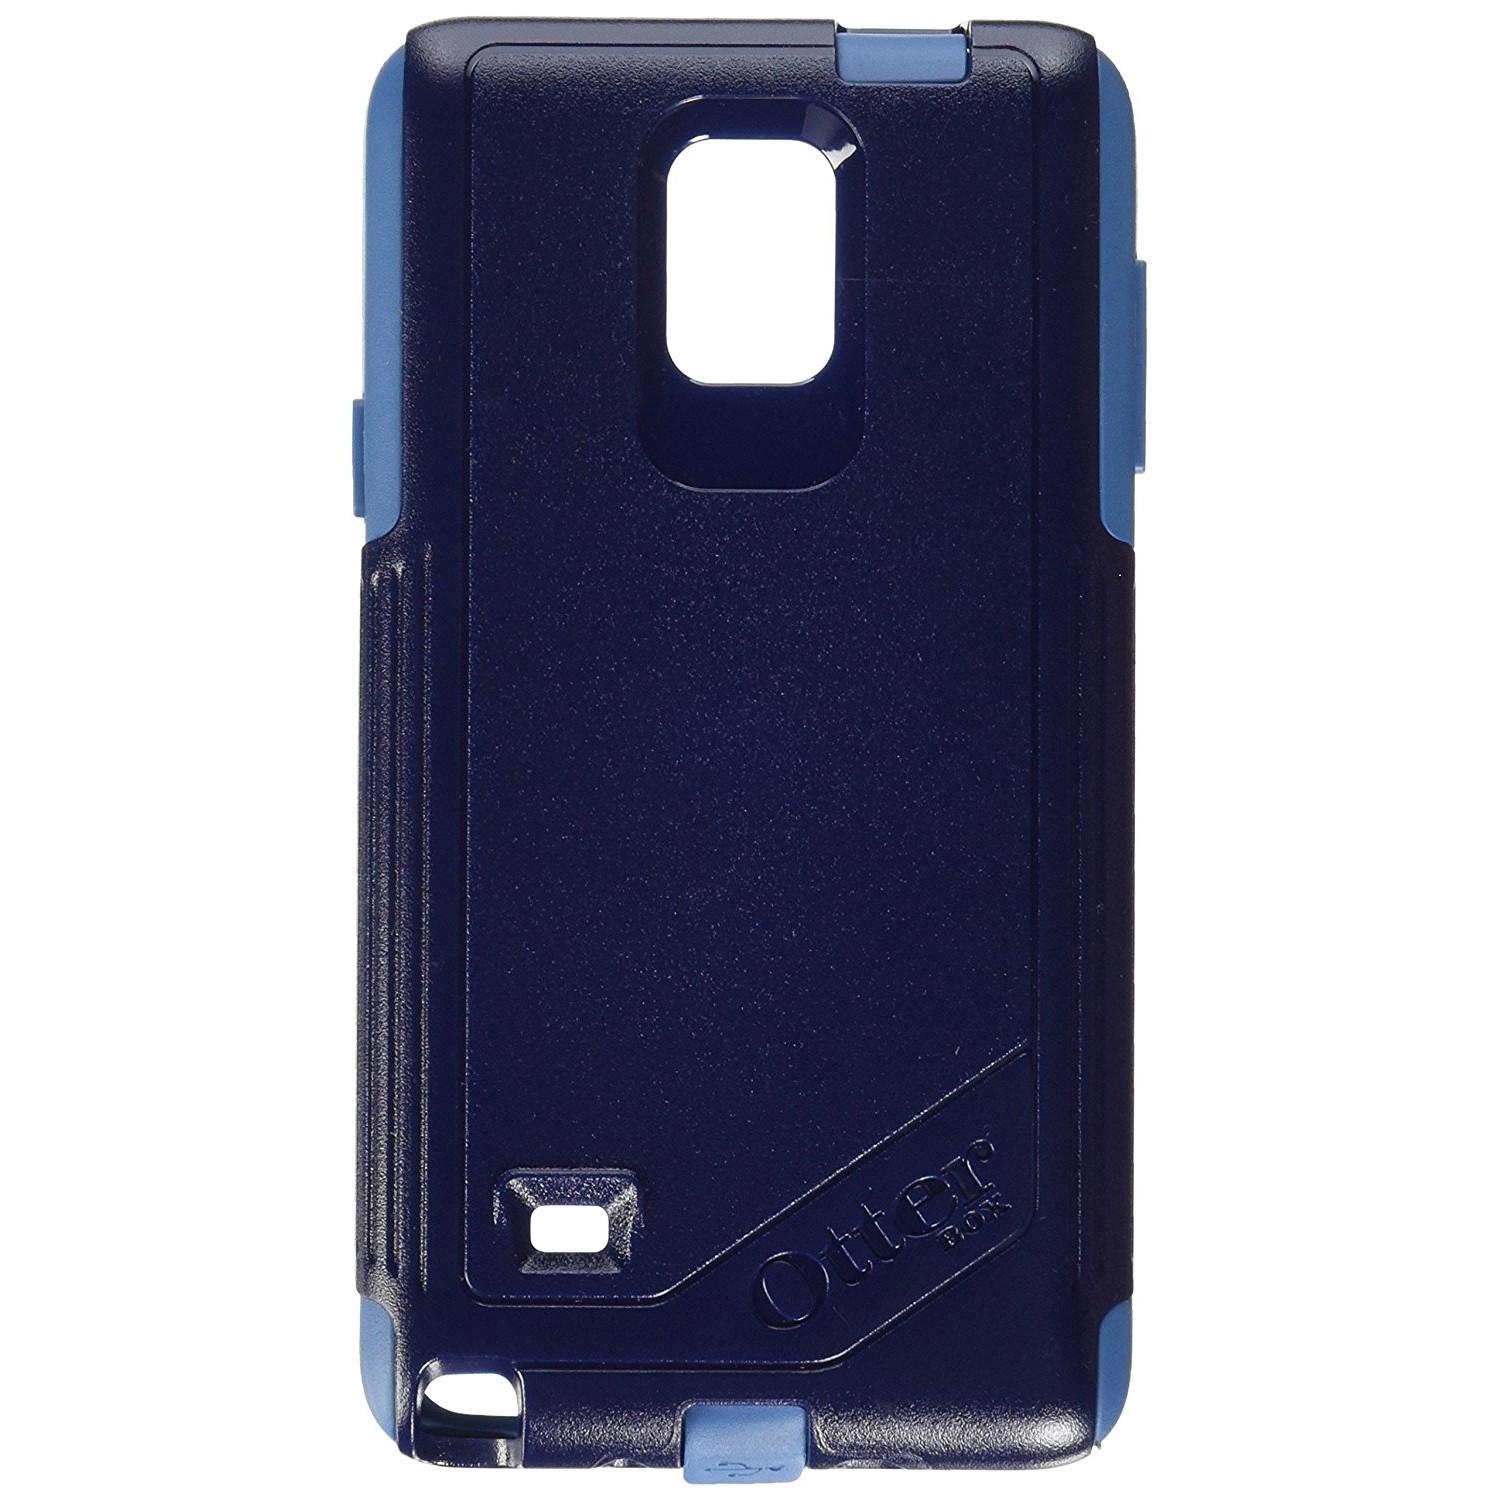 Otterbox Fitted Hard Shell Case for Samsung Galaxy Note 4 - Deep Water;Blue